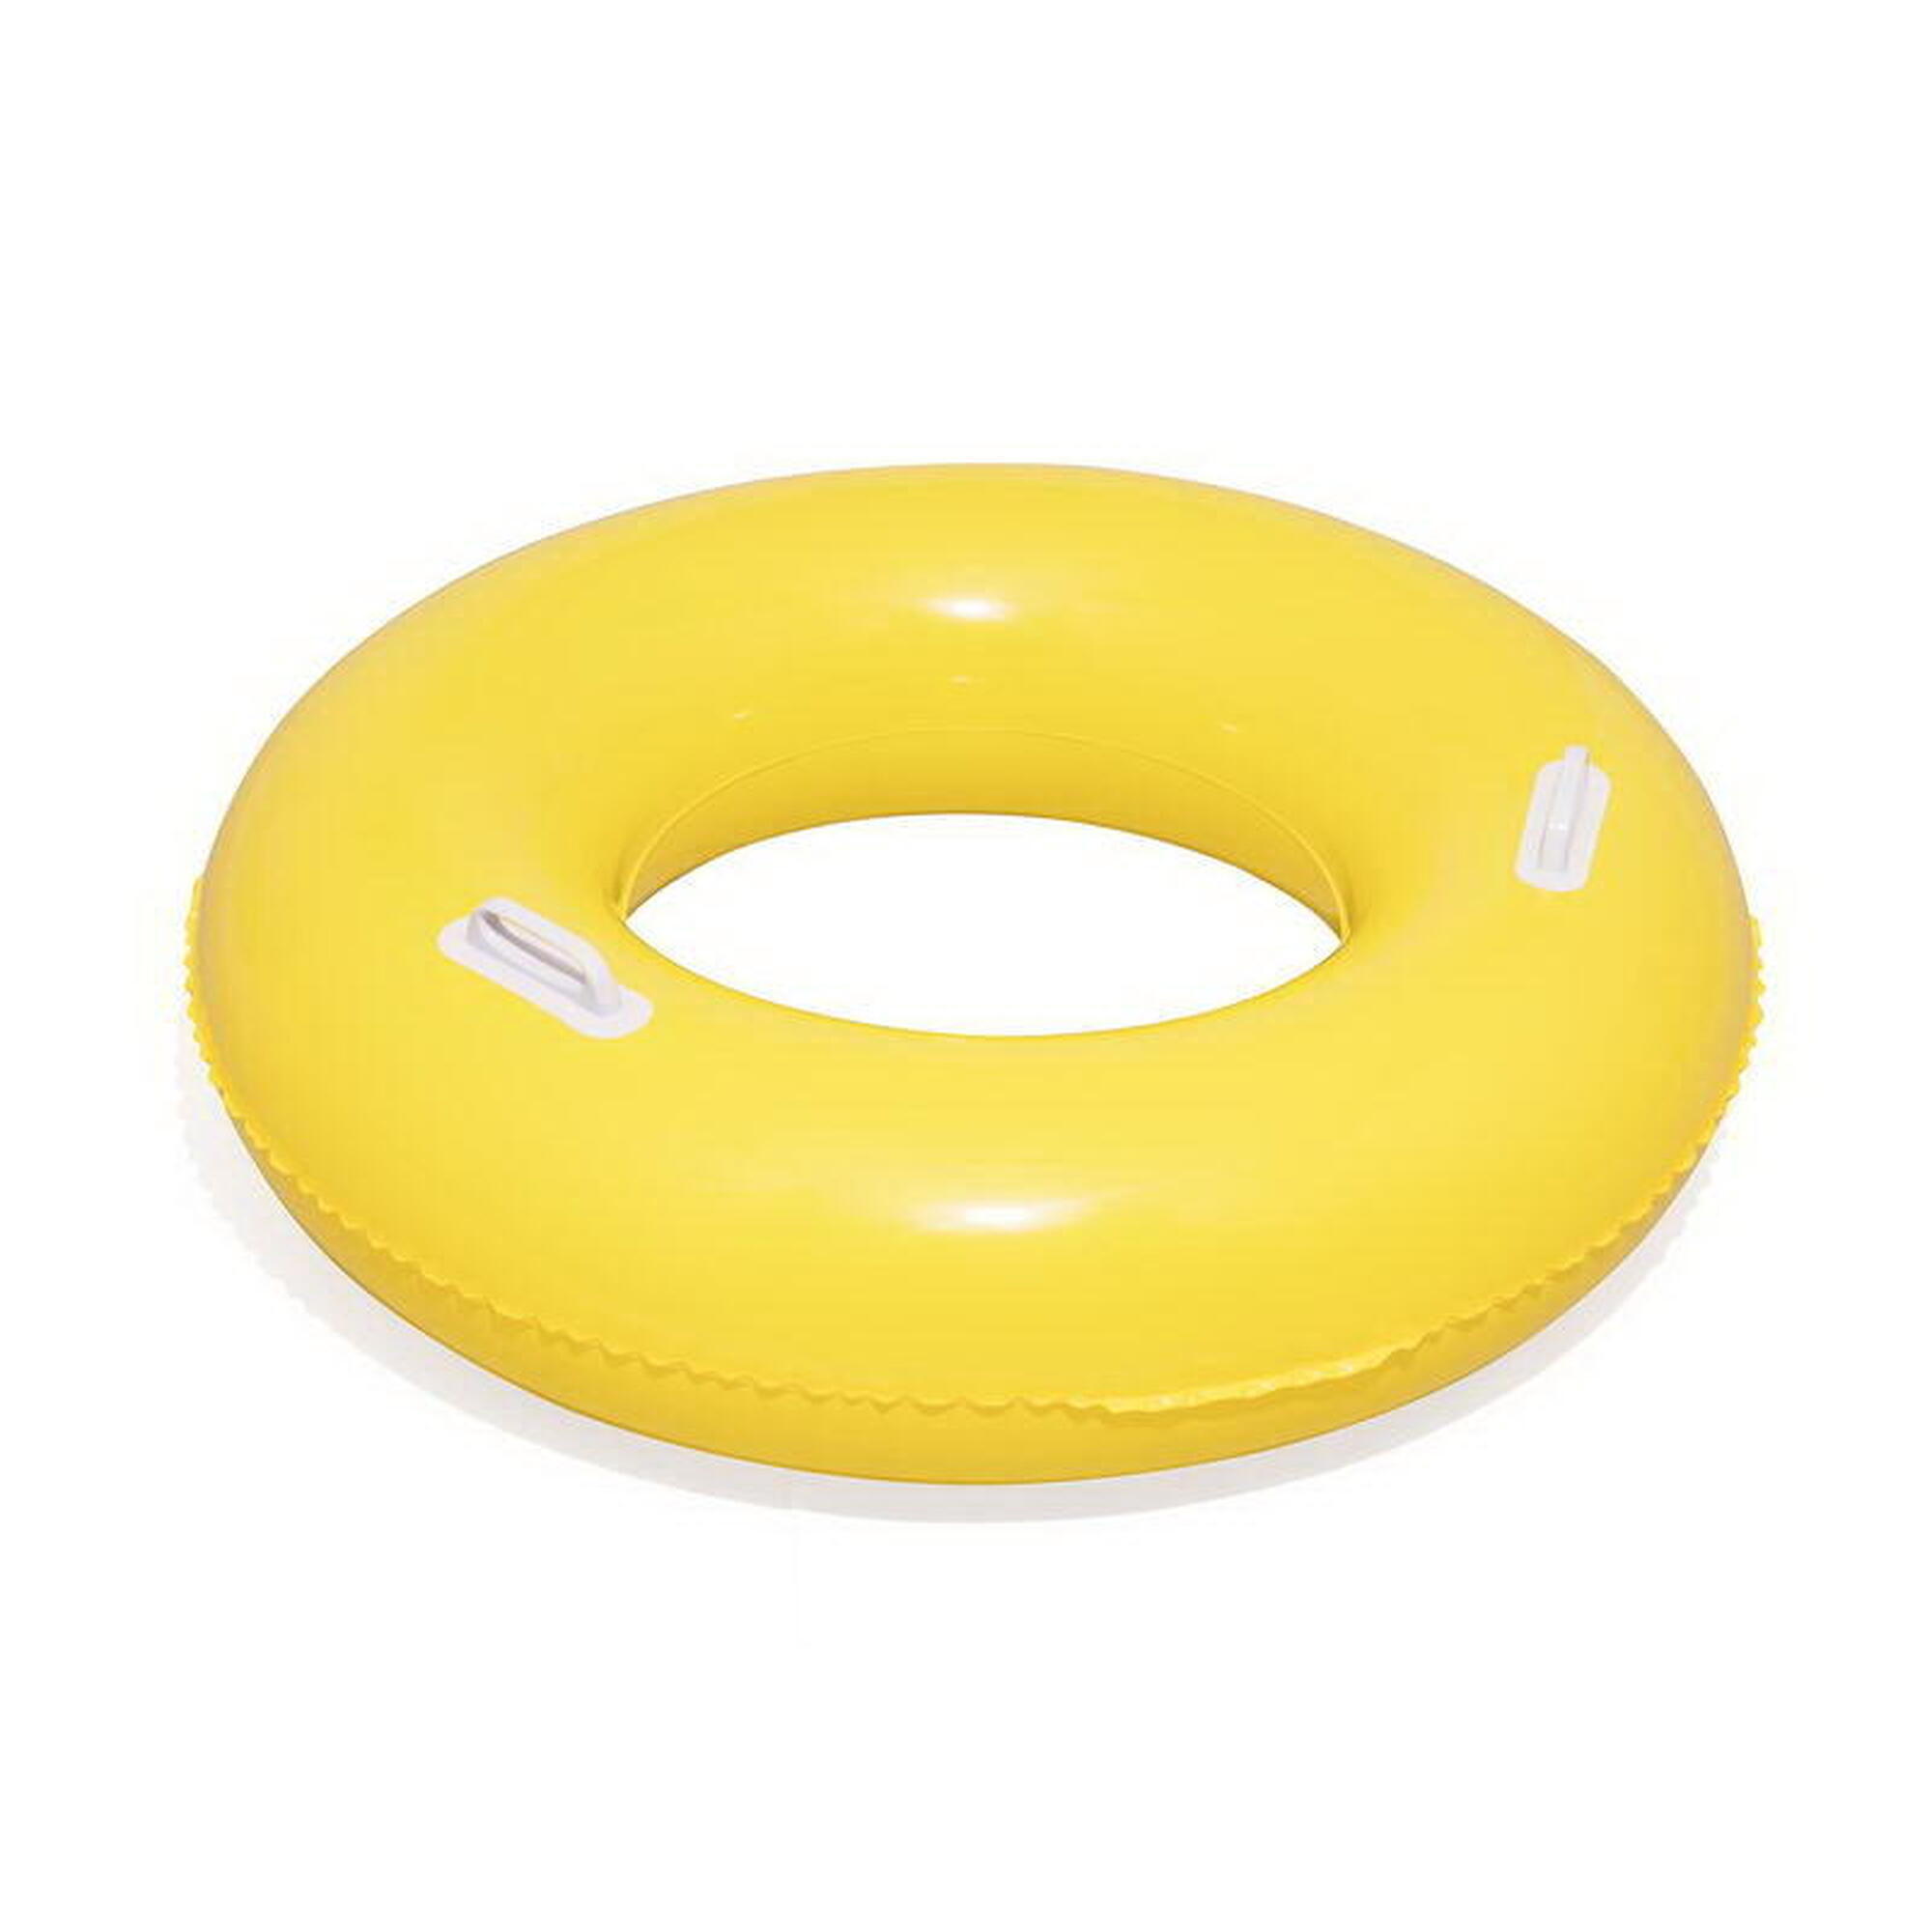 Bestway Swim Ring with Handles 36" - Yellow